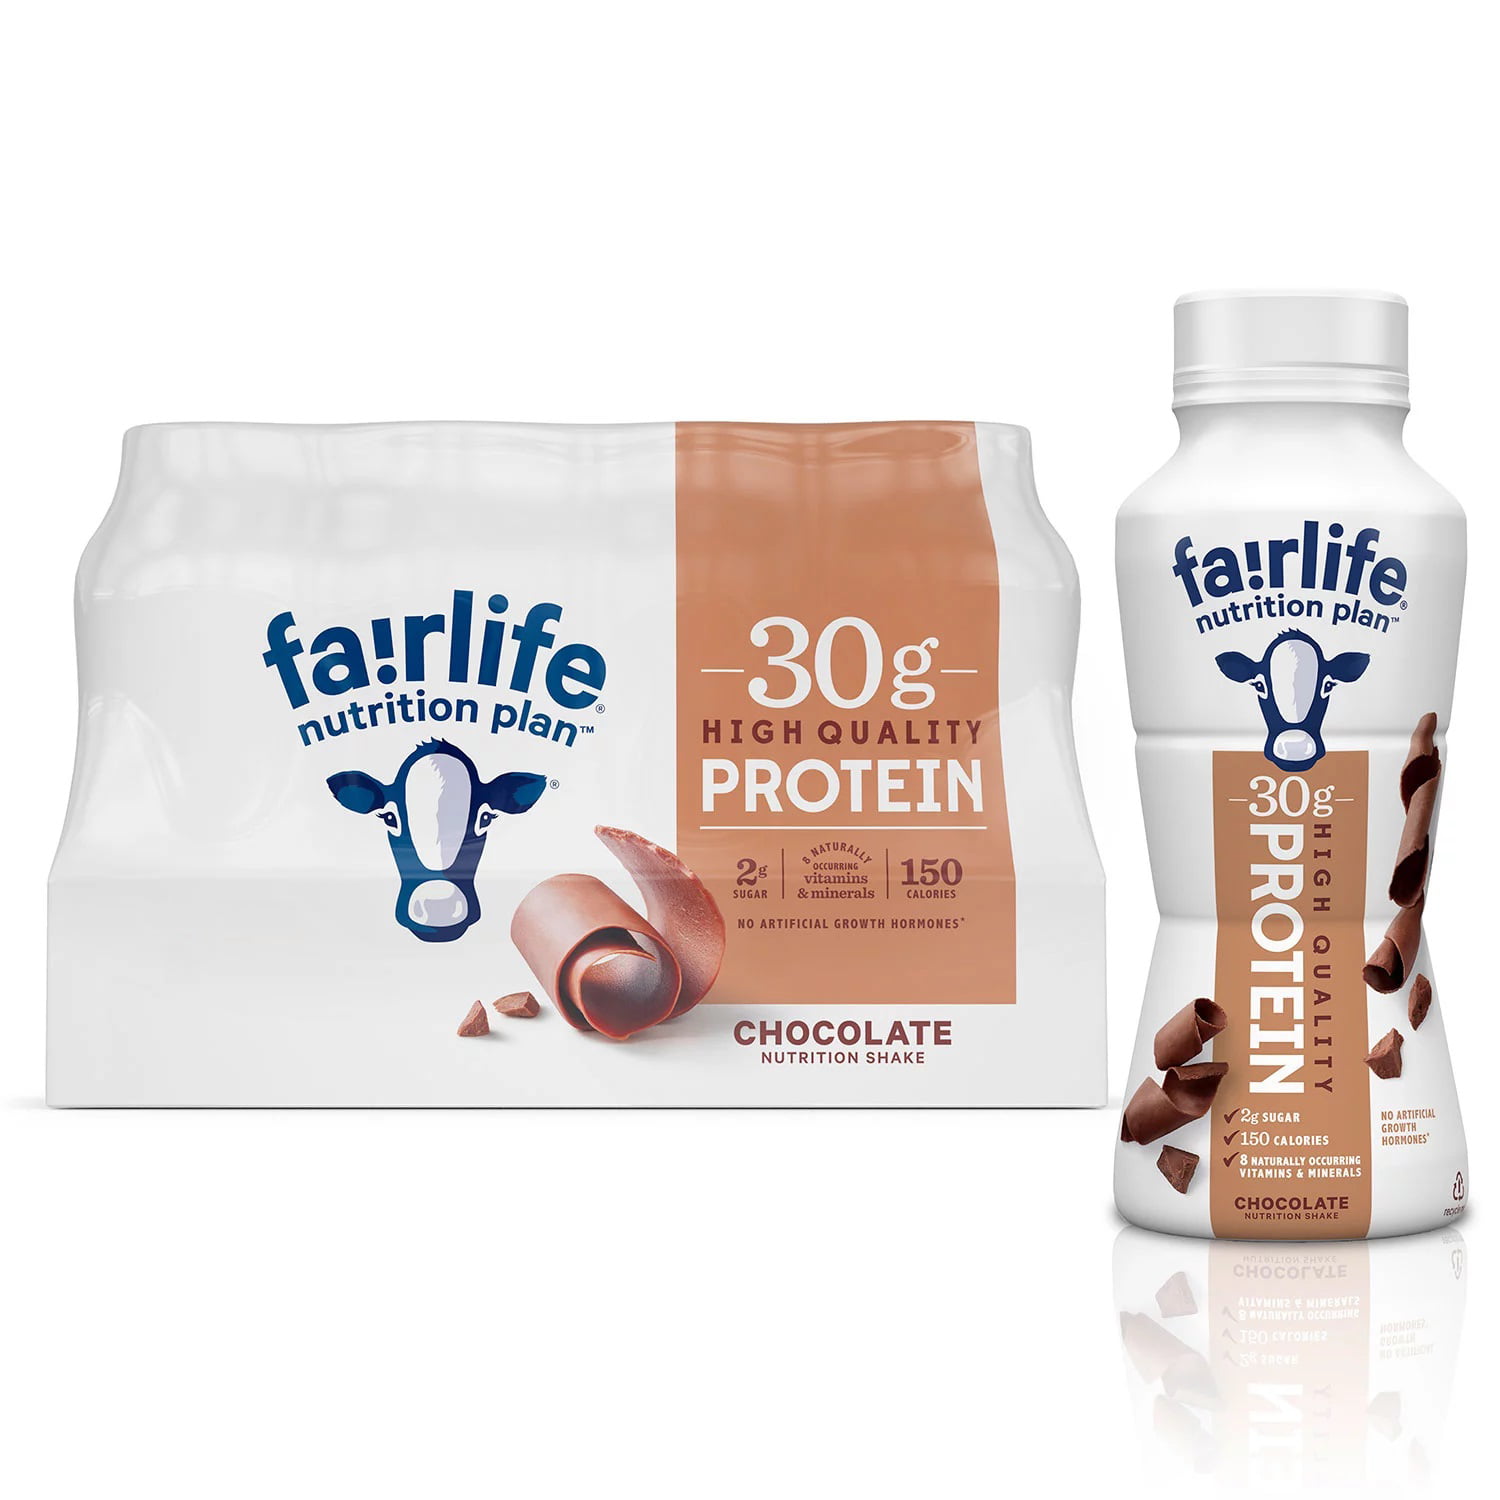 Fairlife Nutrition 30g Protein Shake, Chocolate, 11.5 Fluid Ounce (18 Count)